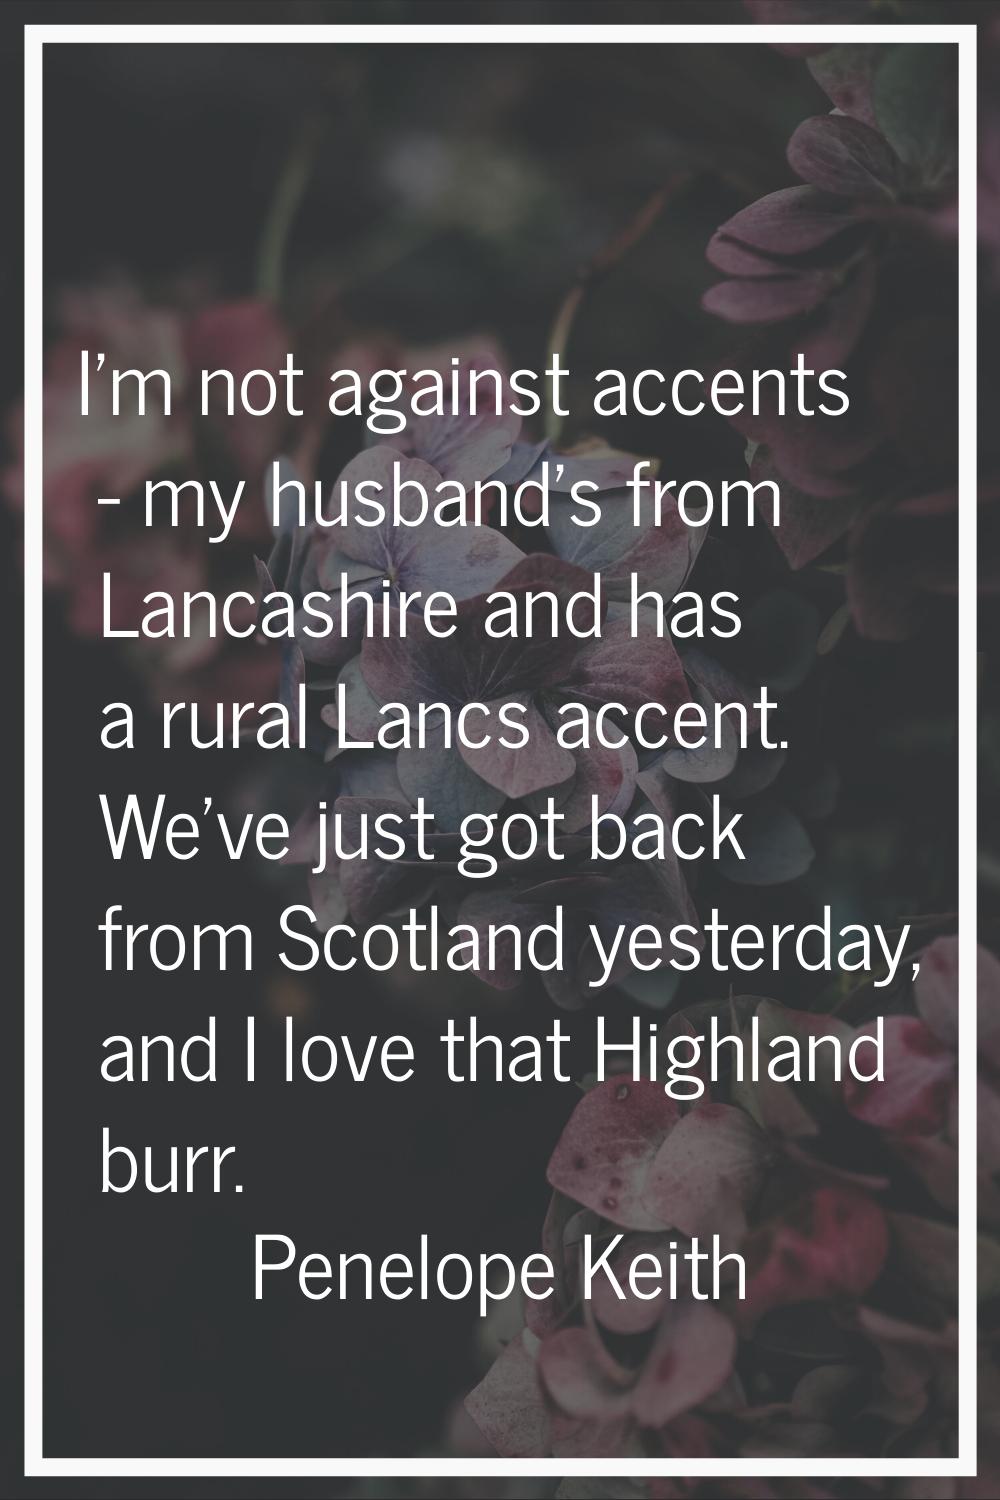 I'm not against accents - my husband's from Lancashire and has a rural Lancs accent. We've just got